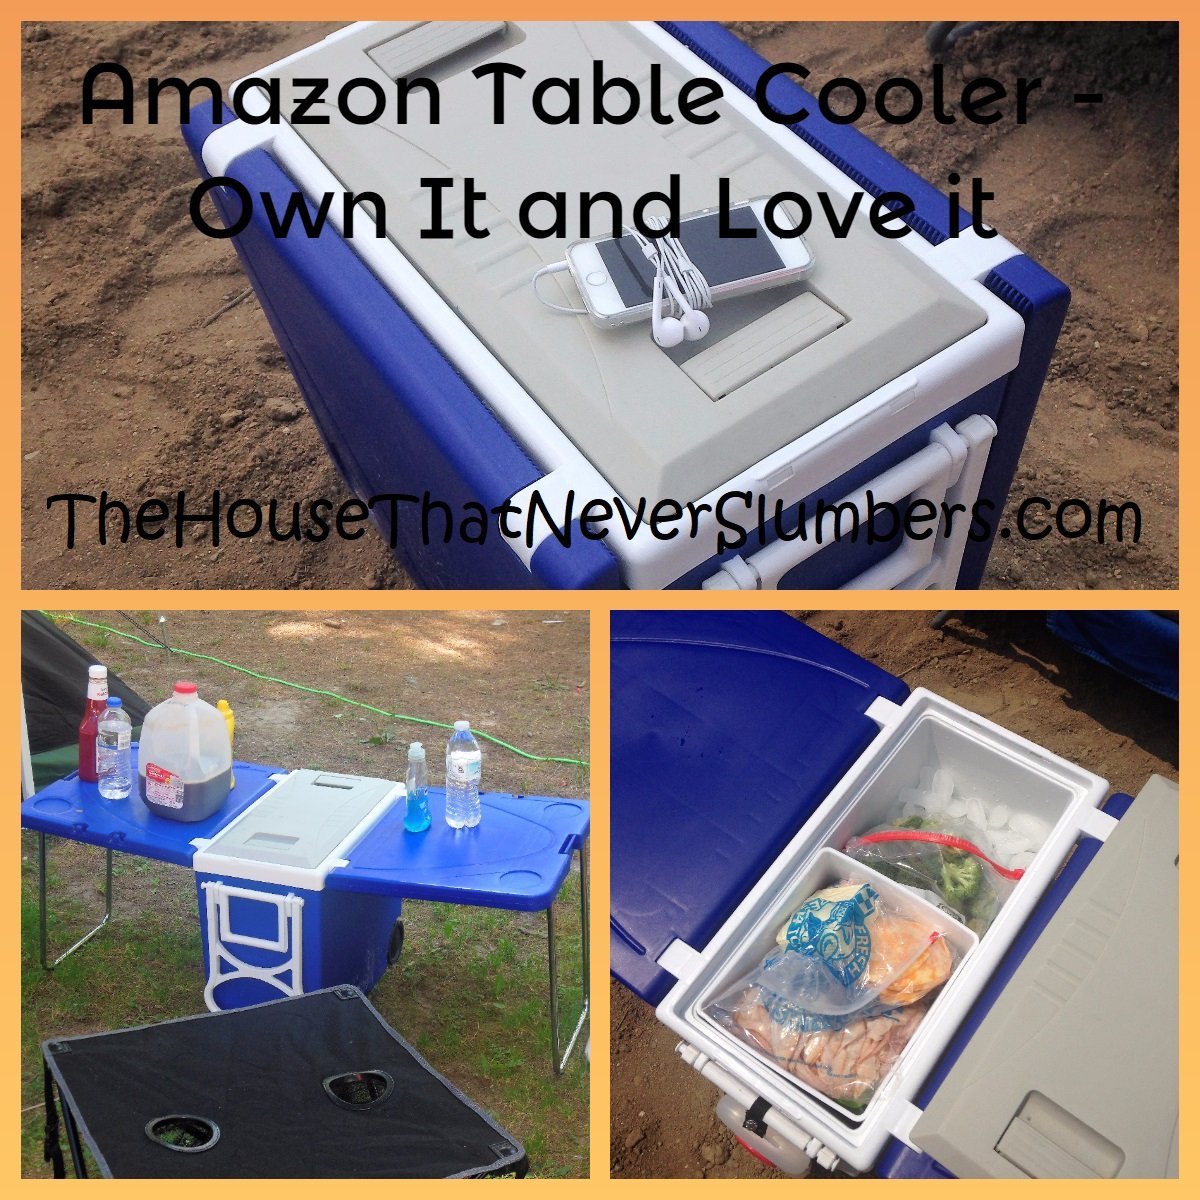 Amazon Table Cooler - This is a product that gets iffy reviews, but I own it and love it! Find out why it works well for my large family.